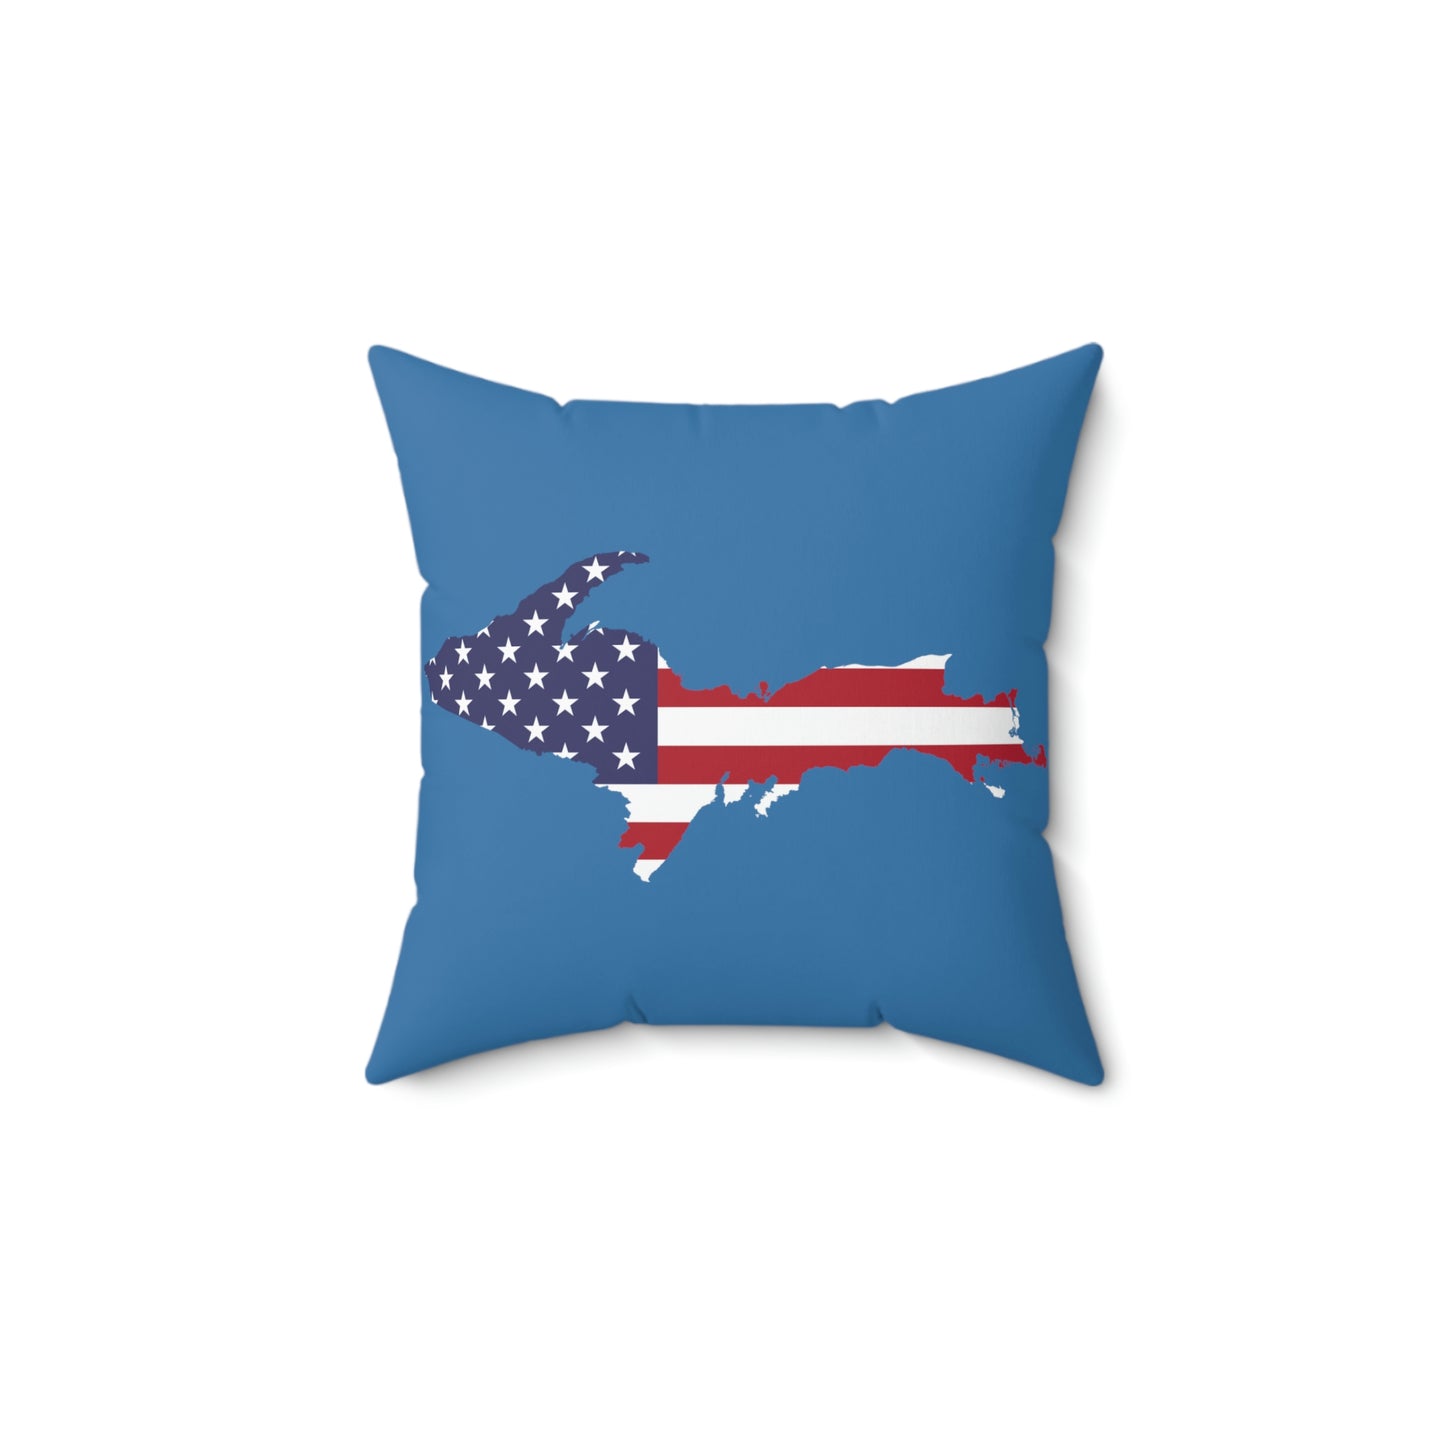 Michigan Upper Peninsula Accent Pillow (w/ UP USA Flag Outline) | Lake Superior Blue